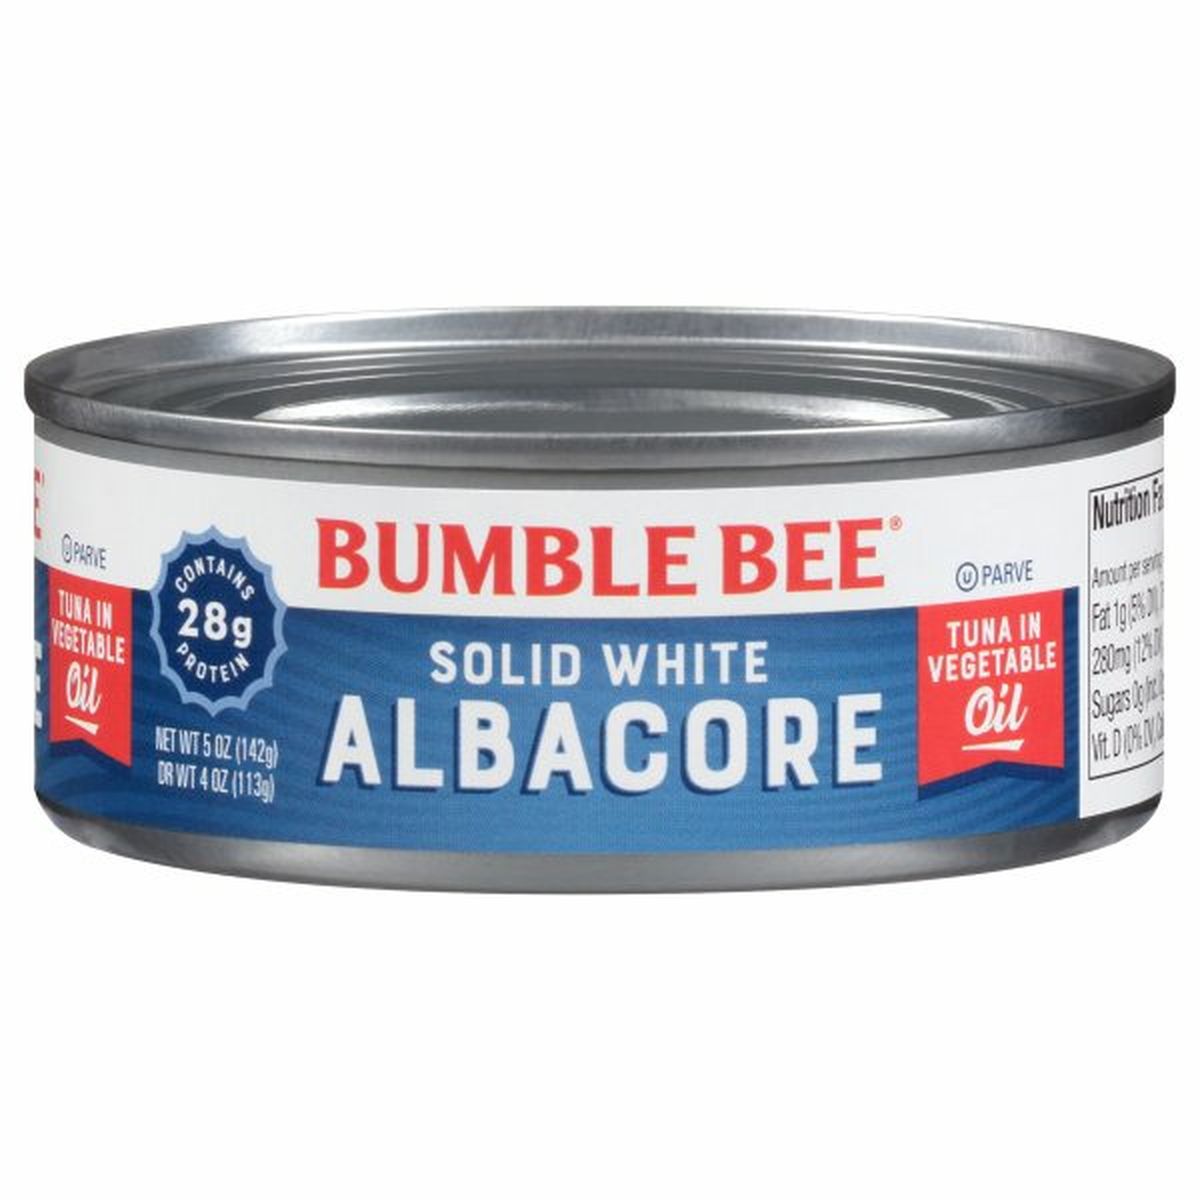 Calories in Bumble Bee Albacore, Solid White